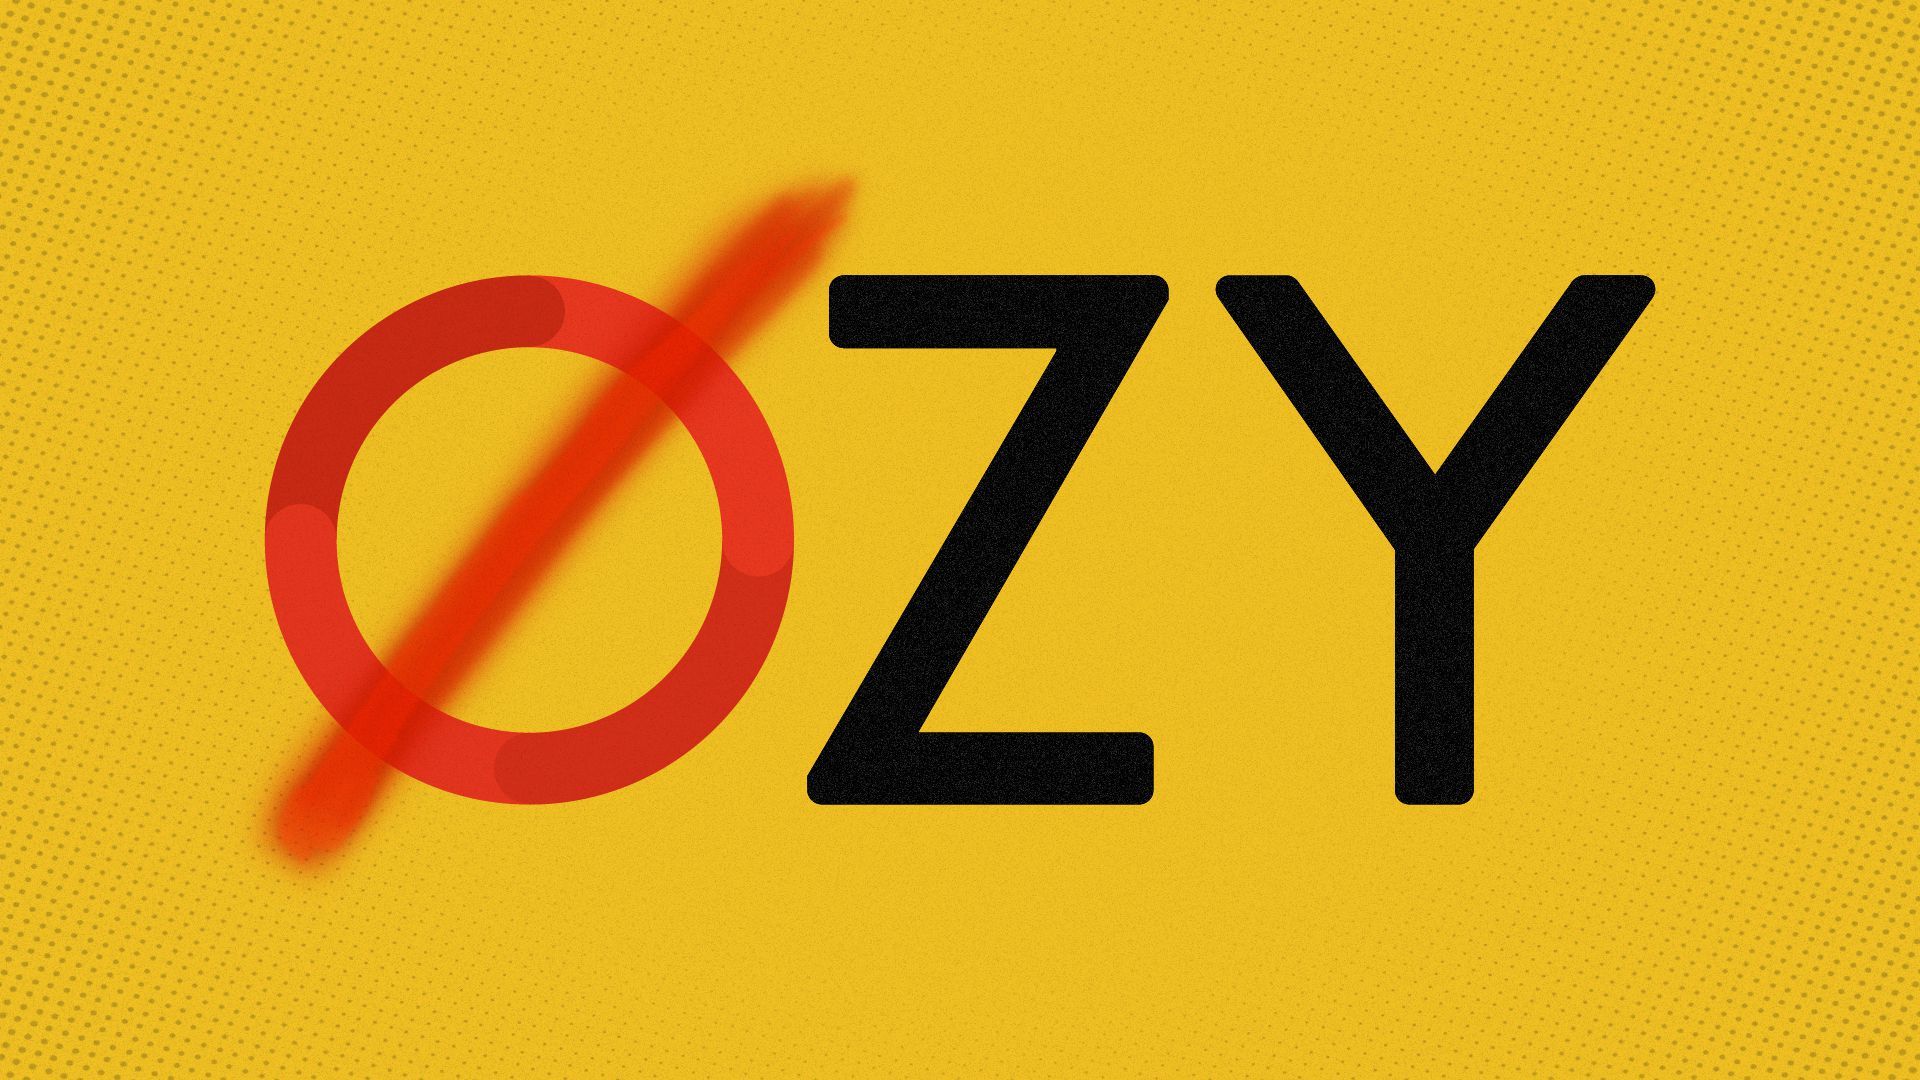 Illustration of the OZY logo with a slashed line over the letter O, forming a no sign.